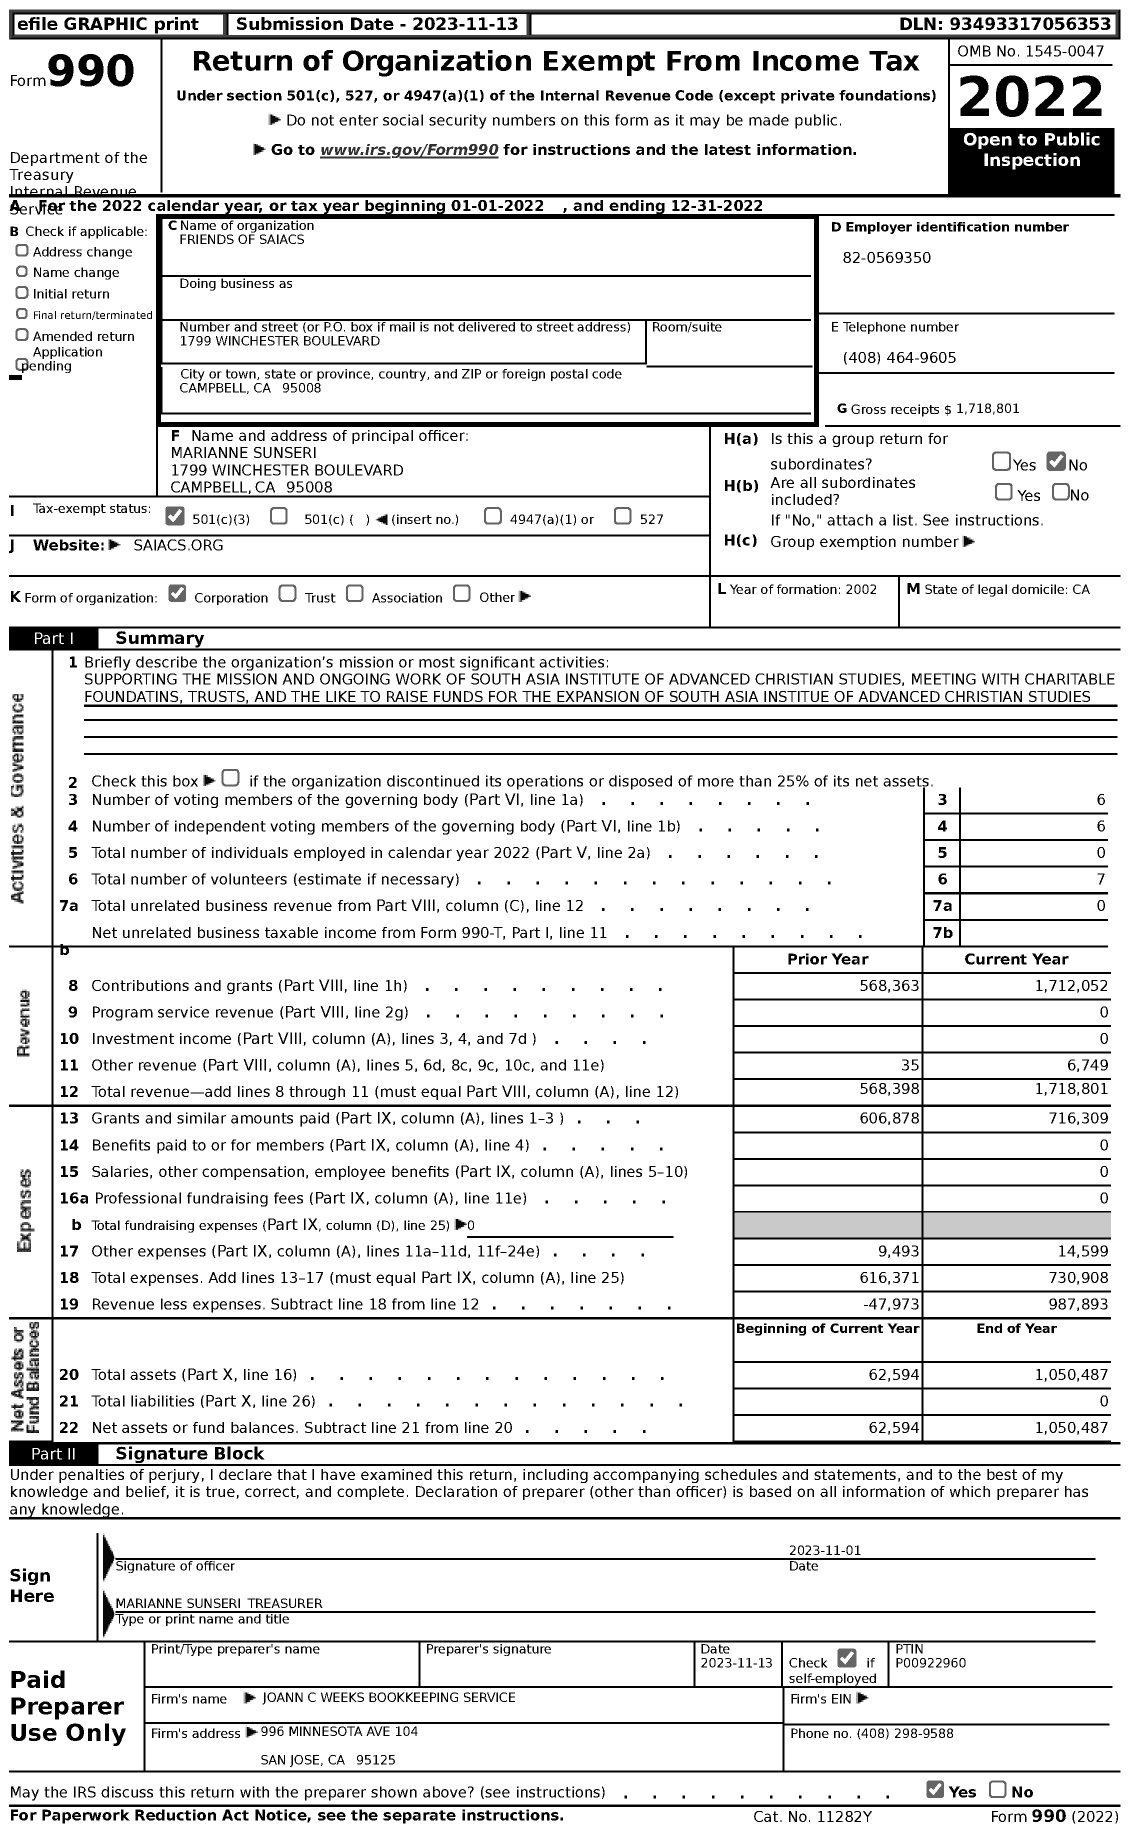 Image of first page of 2022 Form 990 for Friends of Saiacs